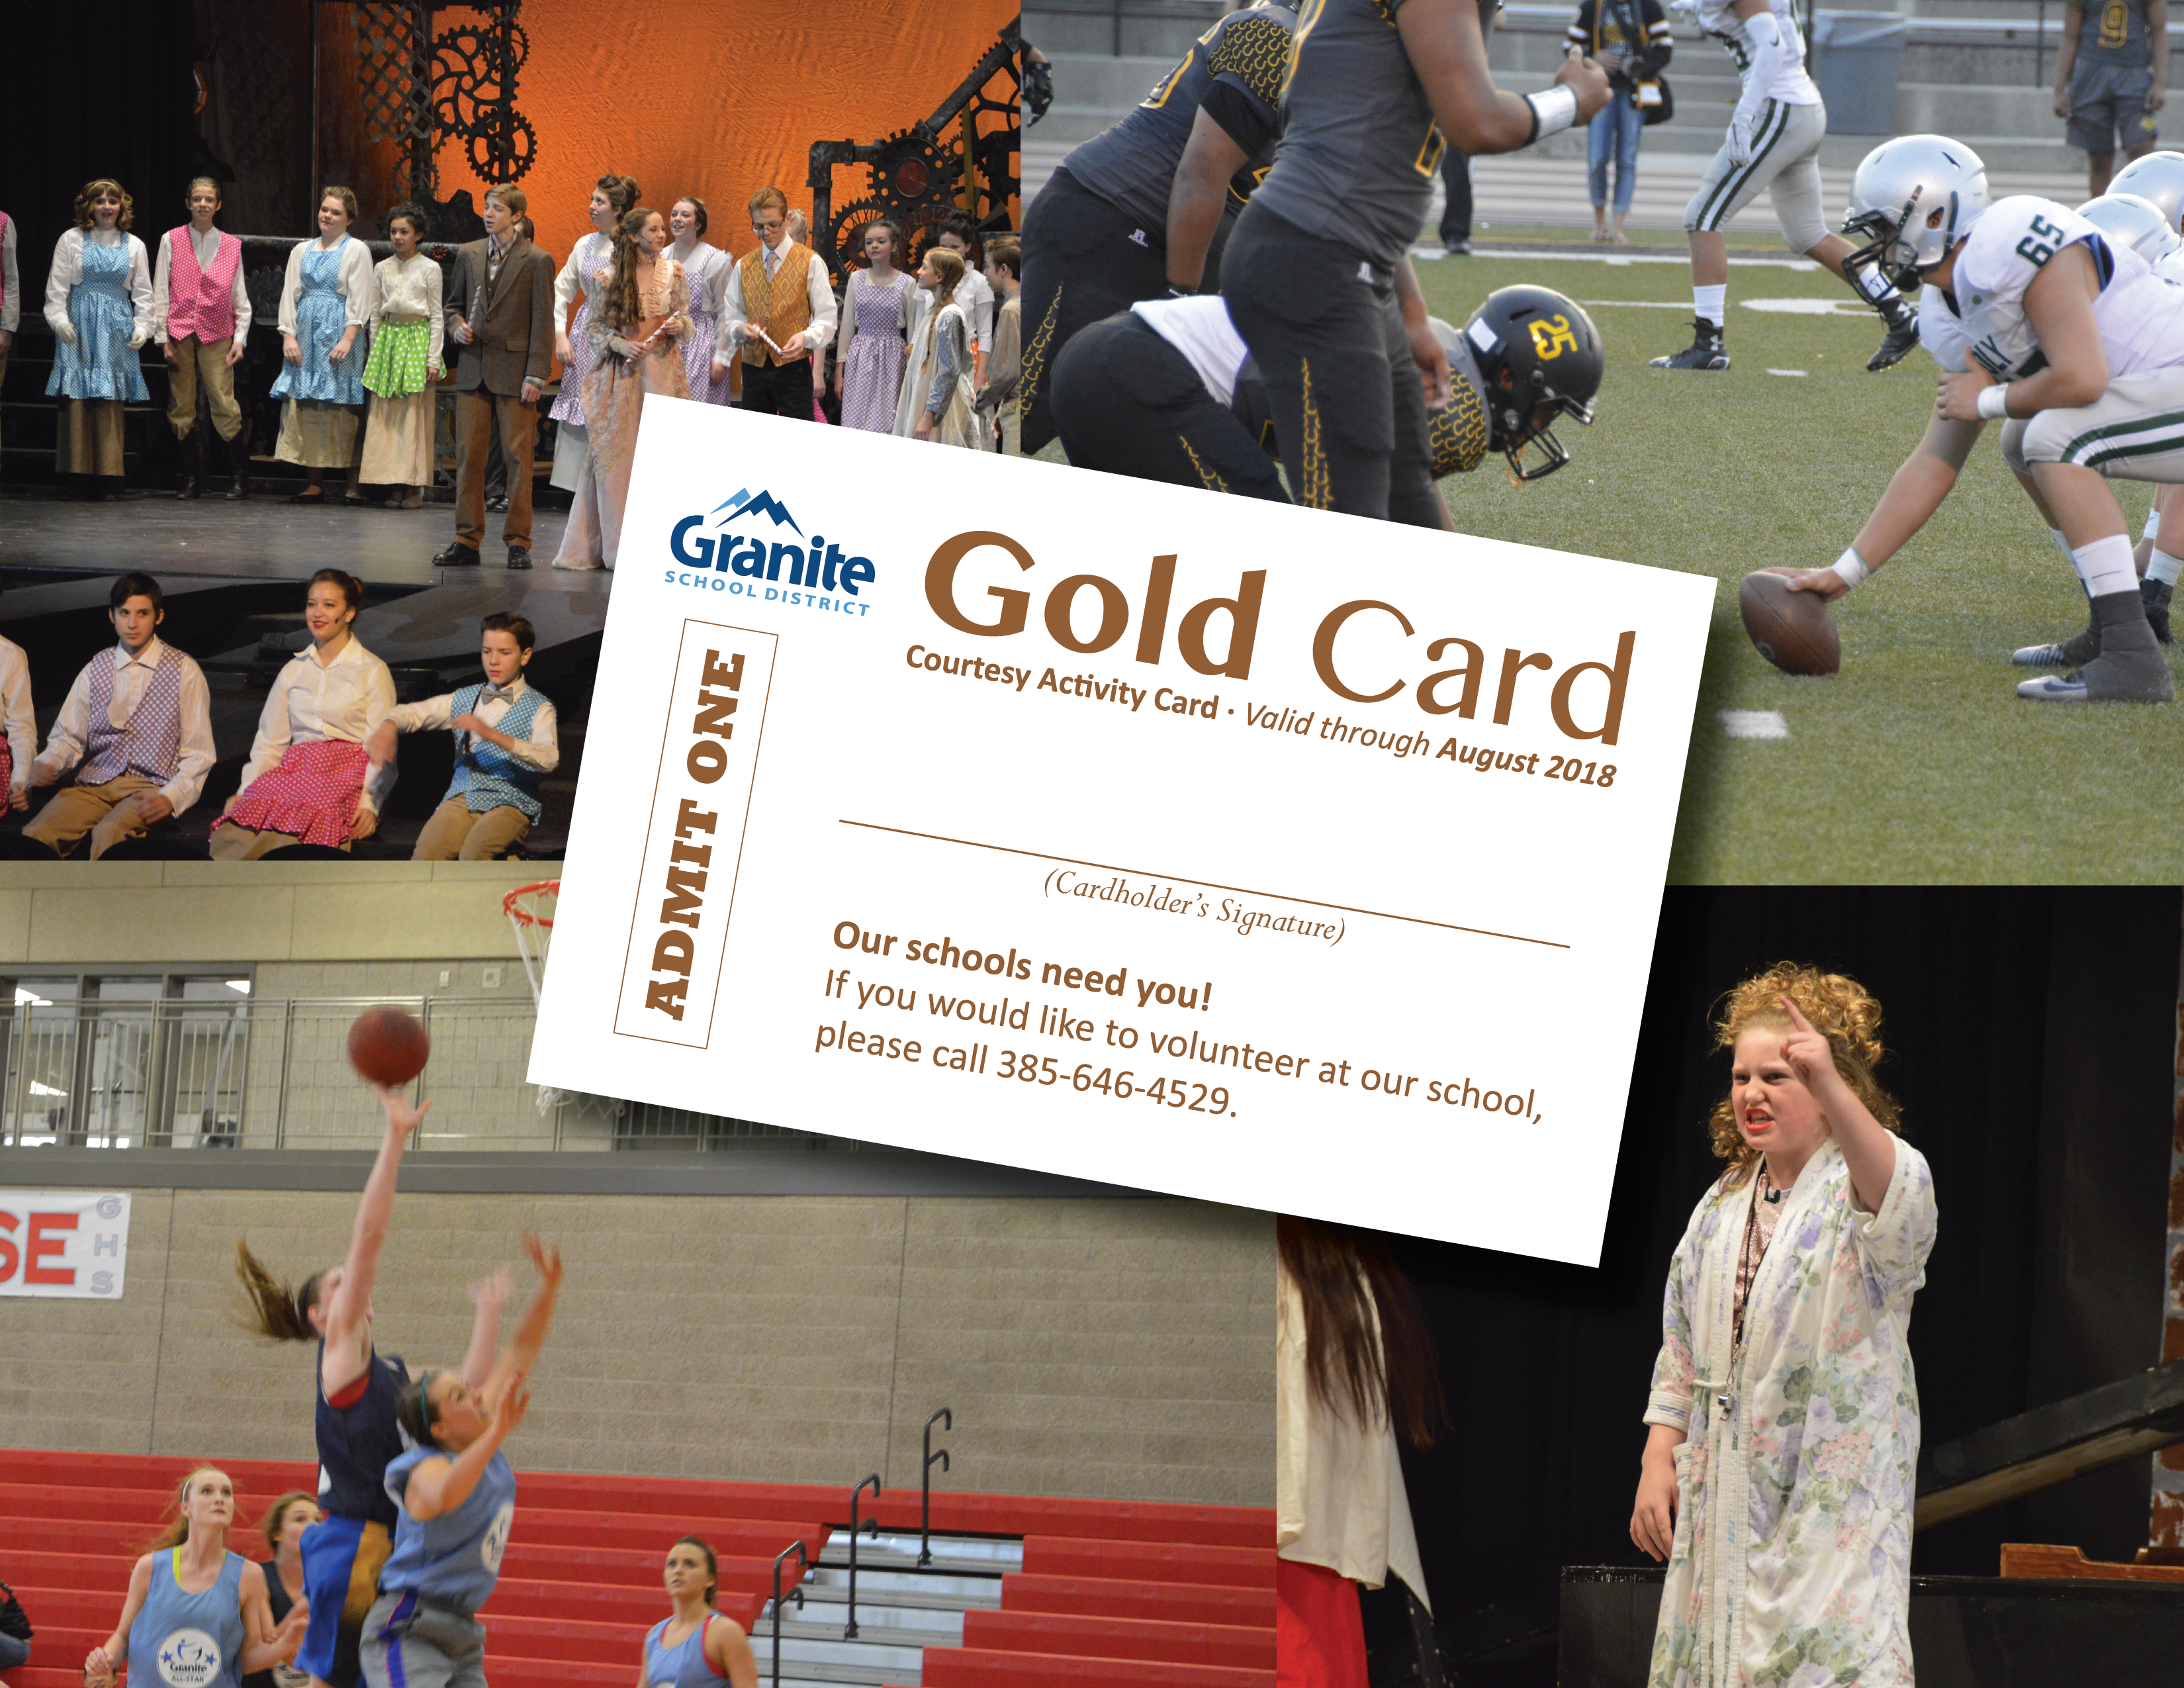 Gold Card offers senior citizens free or reduced admission to school events